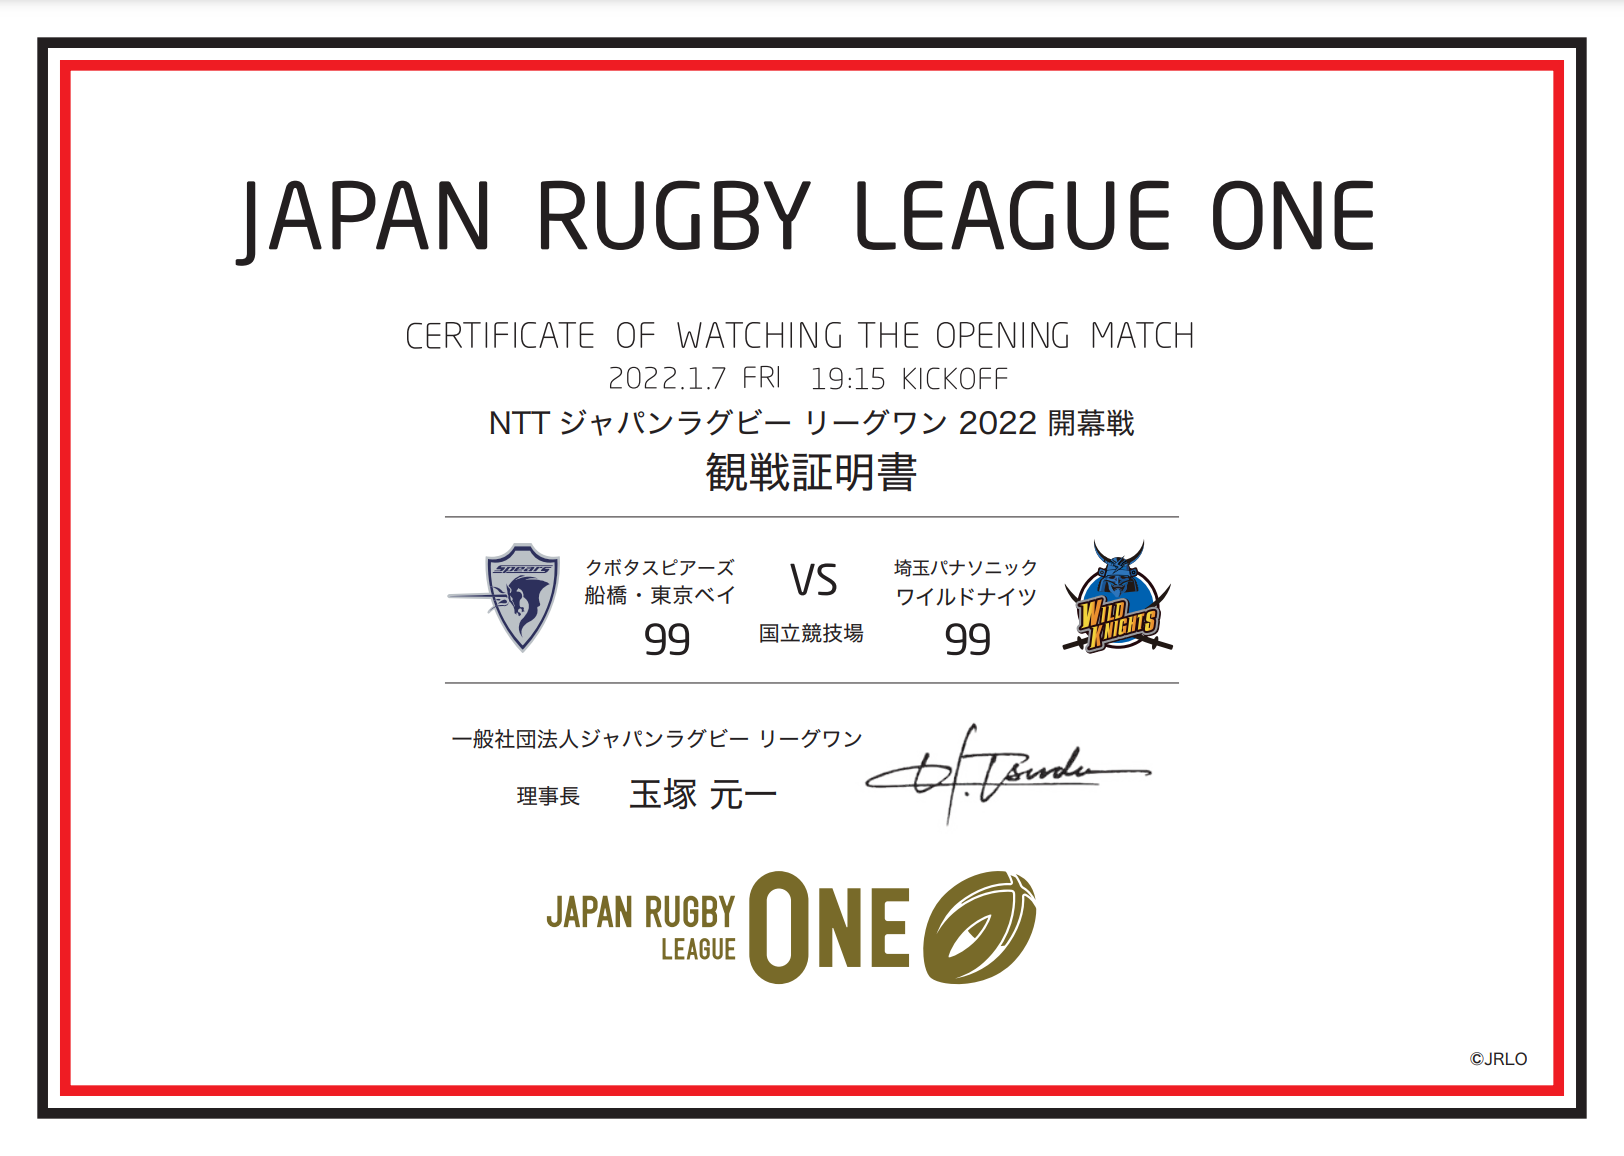 JAPAN RUGBY LEAGUE ONE 公式サイト | 開幕戦チケット販売